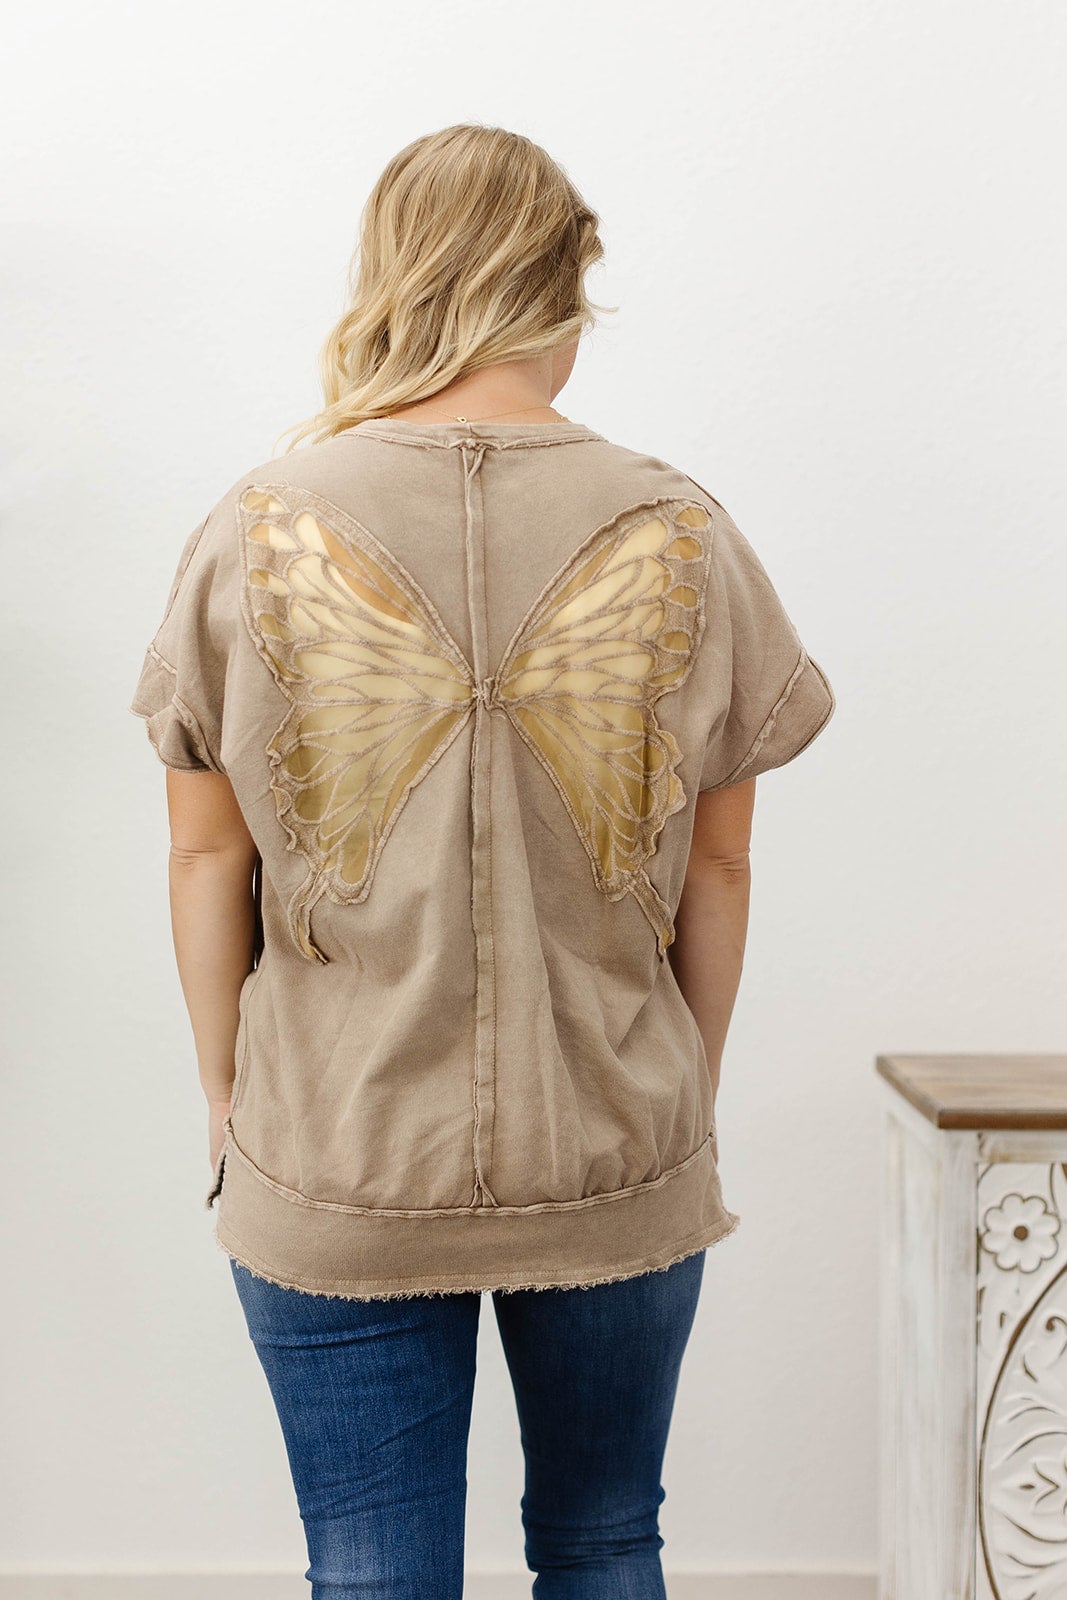 Morgan Mineral Wash Butterfly Detail Top ( Assorted)